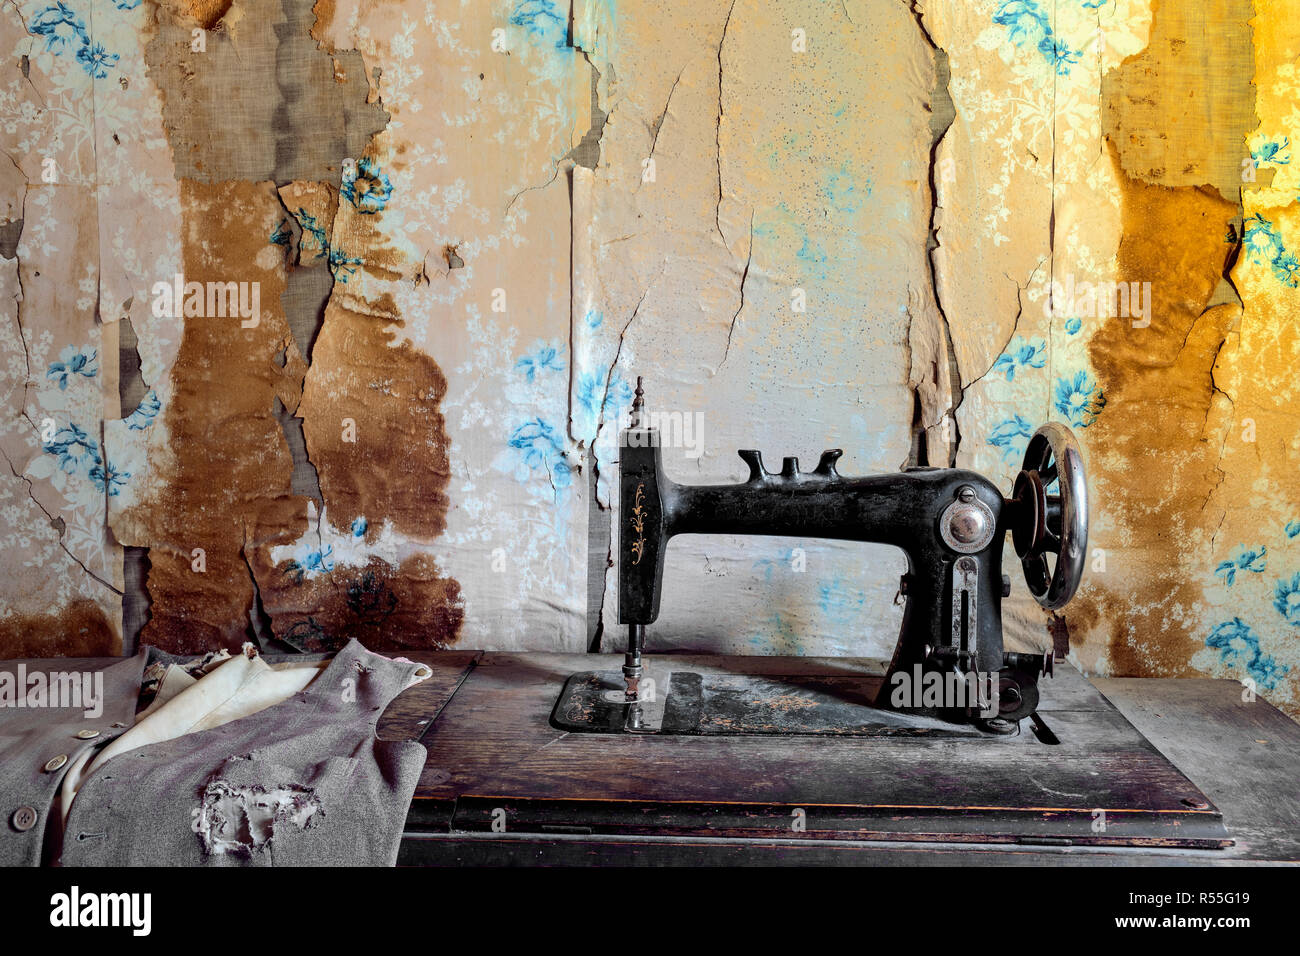 MT00248-00...MONTANA - Sewing machine in the J K Wells Hotel located at the ghost town of Garnet. Stock Photo